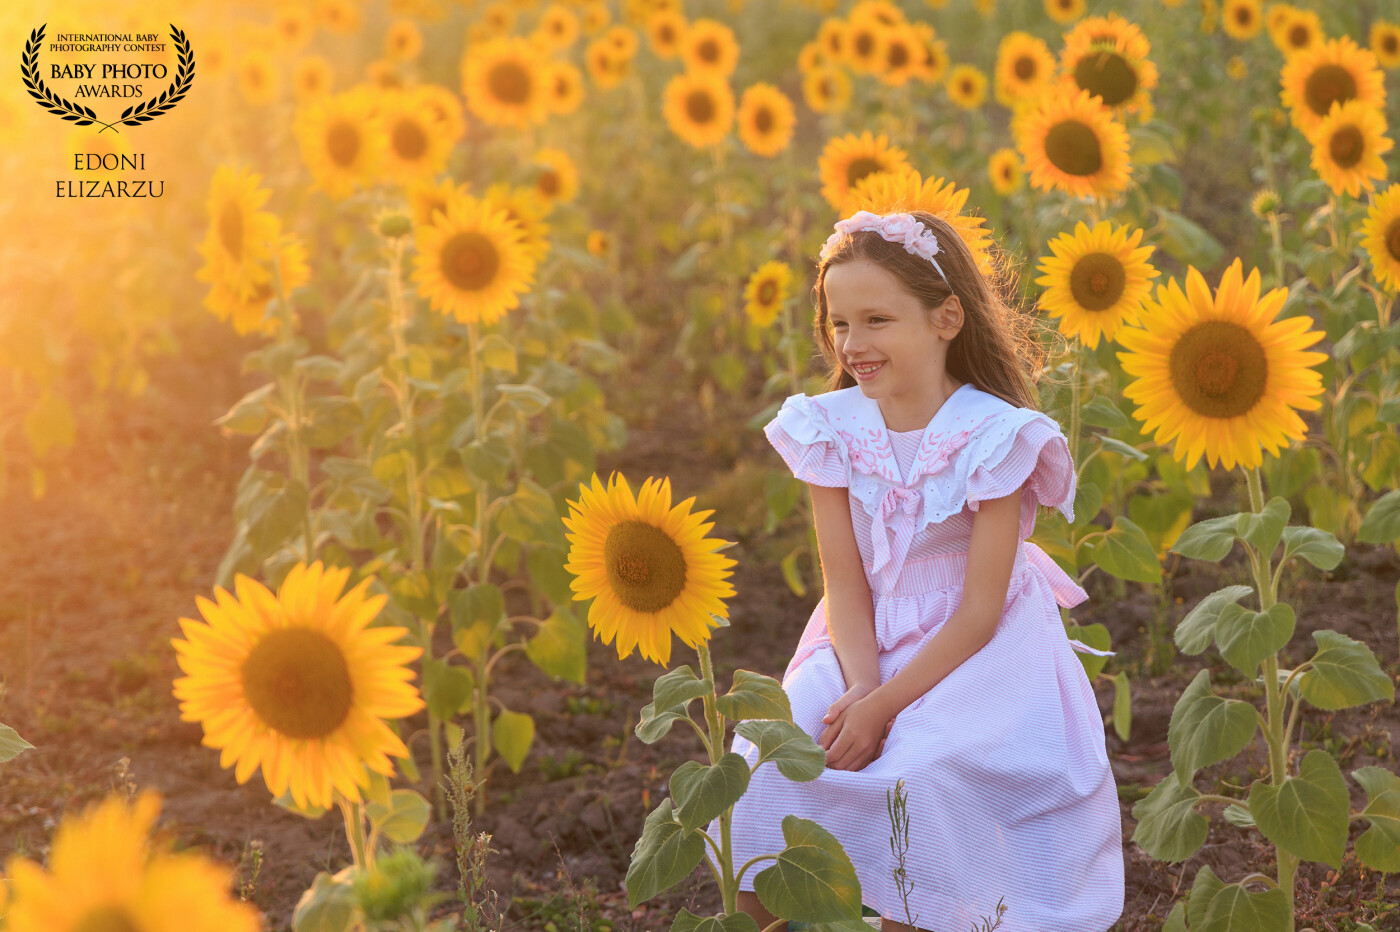 My little girl surrounded by sunflowers! In love with this photo since I saw it on the screen! Curious fact: the dress belonged to her mom when she was little